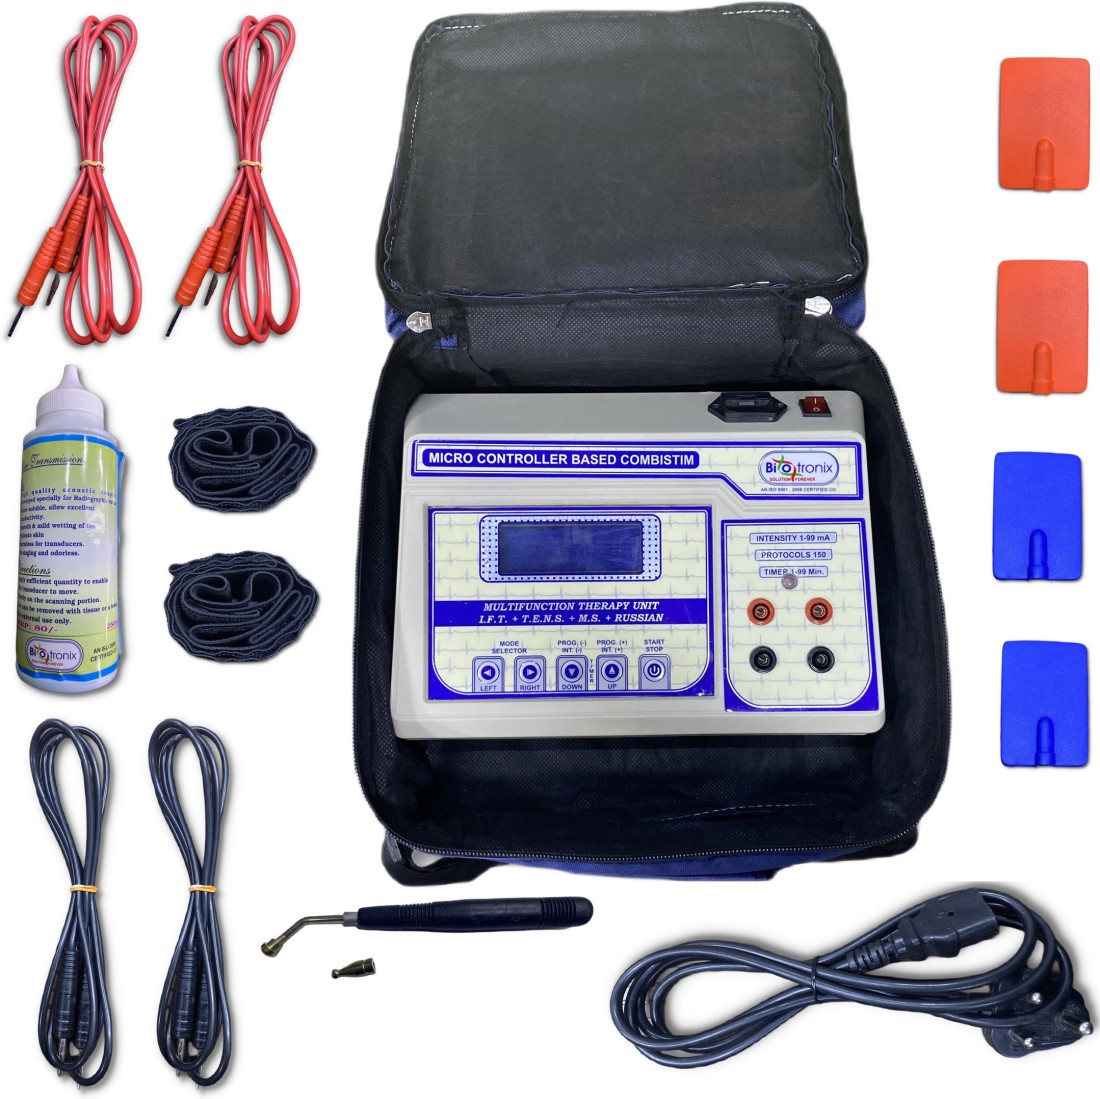 https://rukminim2.flixcart.com/image/1100/1300/xif0q/electrotherapy/f/w/d/ift-interferential-therapy-150-pre-program-lcd-with-tens-ms-original-imagghygzfgfhrpc.jpeg?q=90